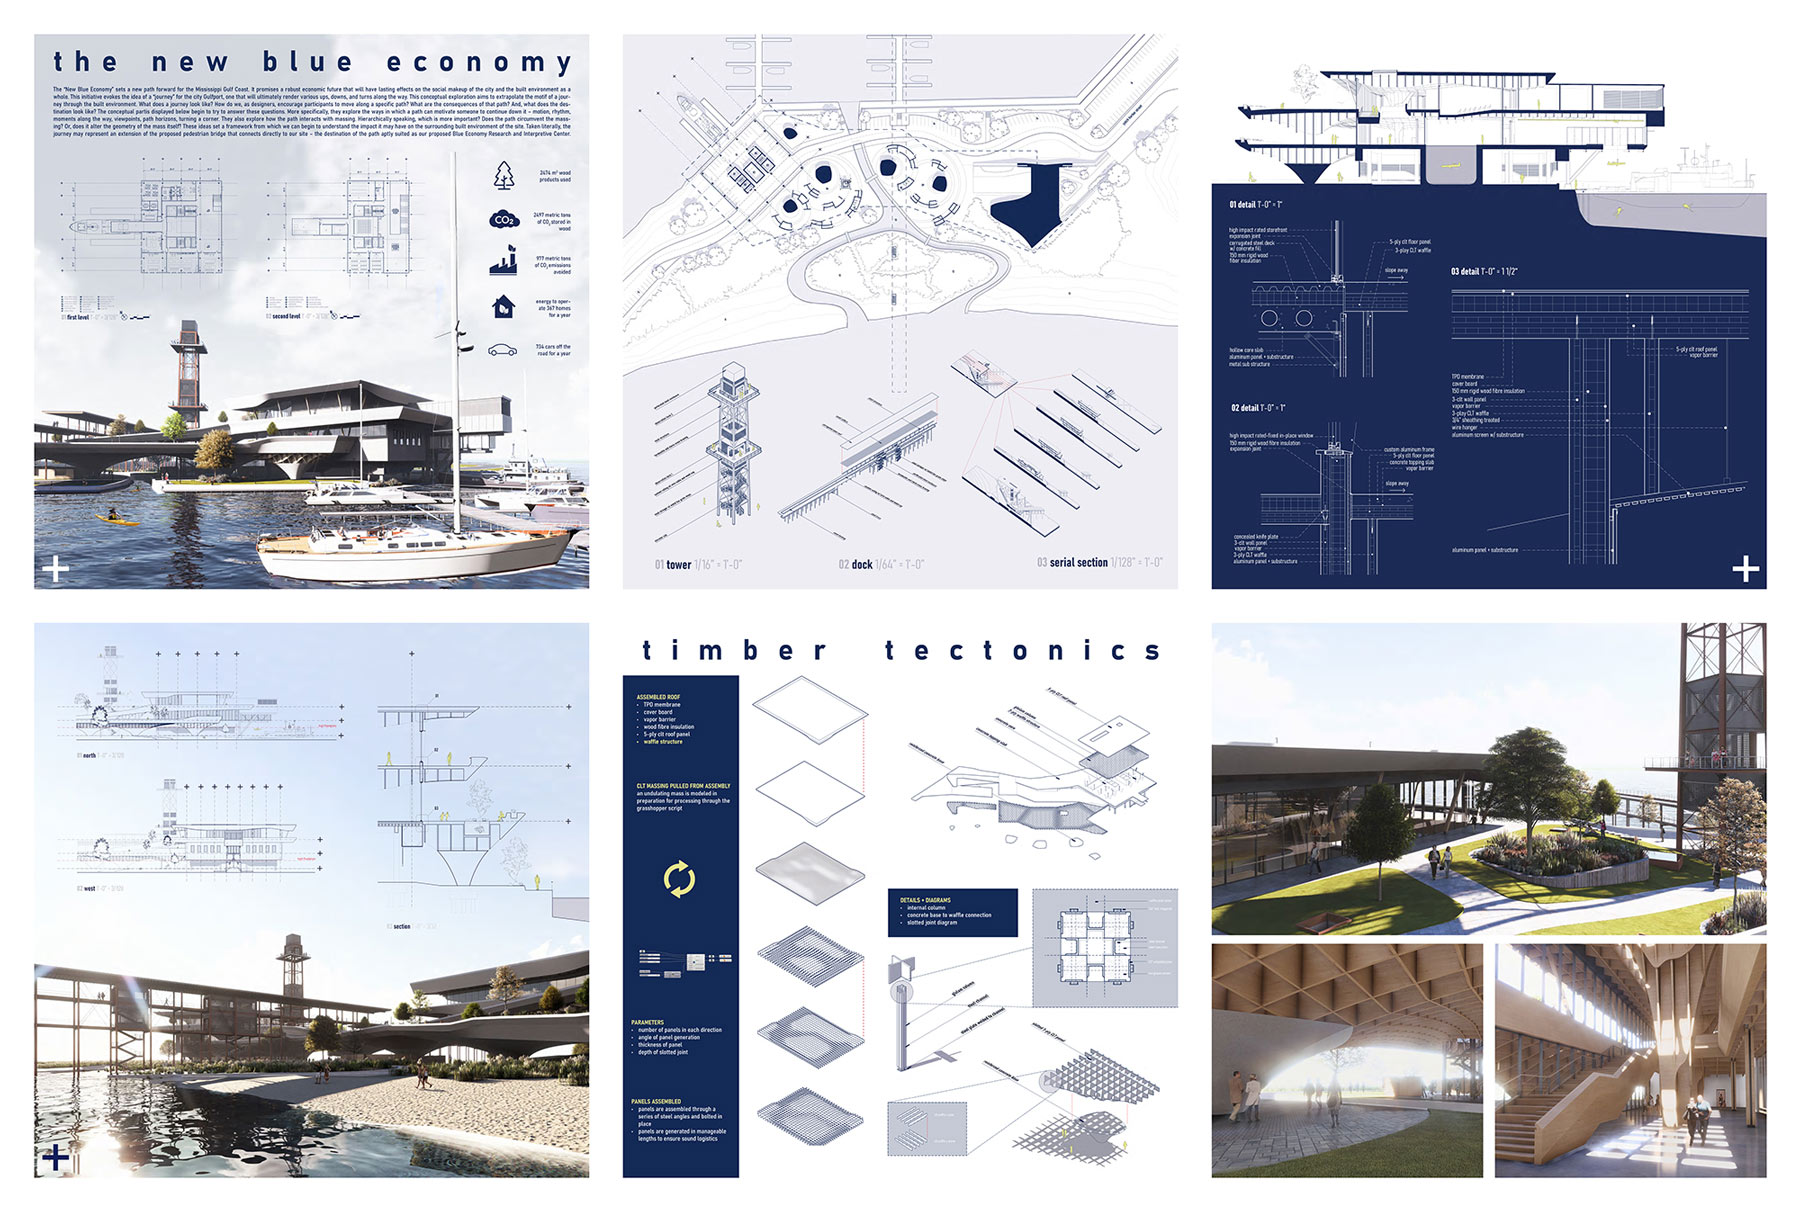 A collage of eight different photos. Most of them being gray, white, and navy blueprints of the building. A few of them being mock-reality photos of the building if it were real. Part of the building is on a dock over the water, and includes a boat in the photo. There is a tower sticking out of the building. It is an irregular shaped building with many levels and layers. The inside includes light wood designs with box-like wooden ceiling.